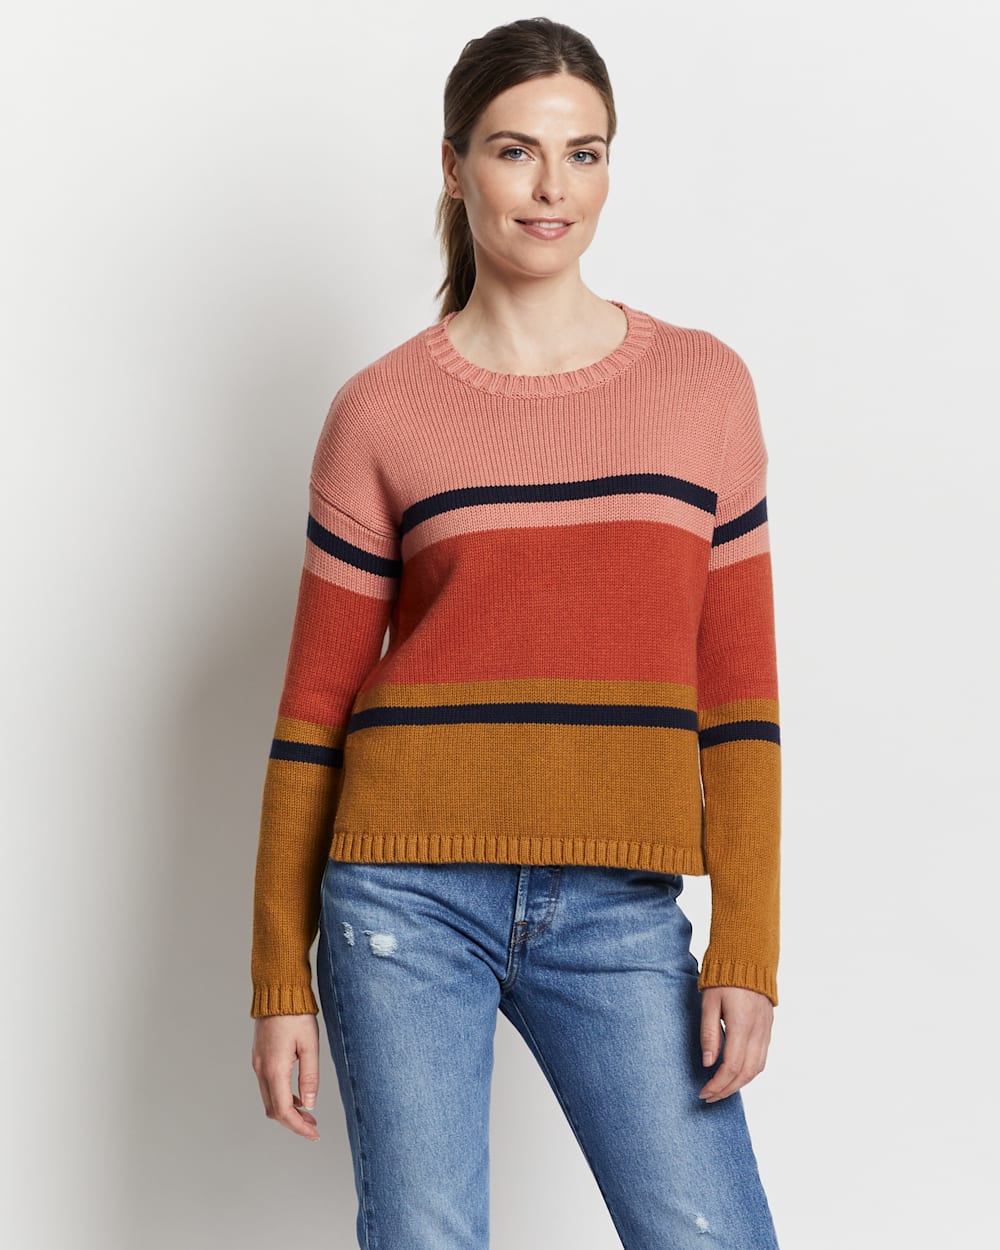 ALTERNATE VIEW OF WOMEN'S RELAXED-FIT STRIPE PULLOVER IN PEANUT/CORAL MULTI image number 5